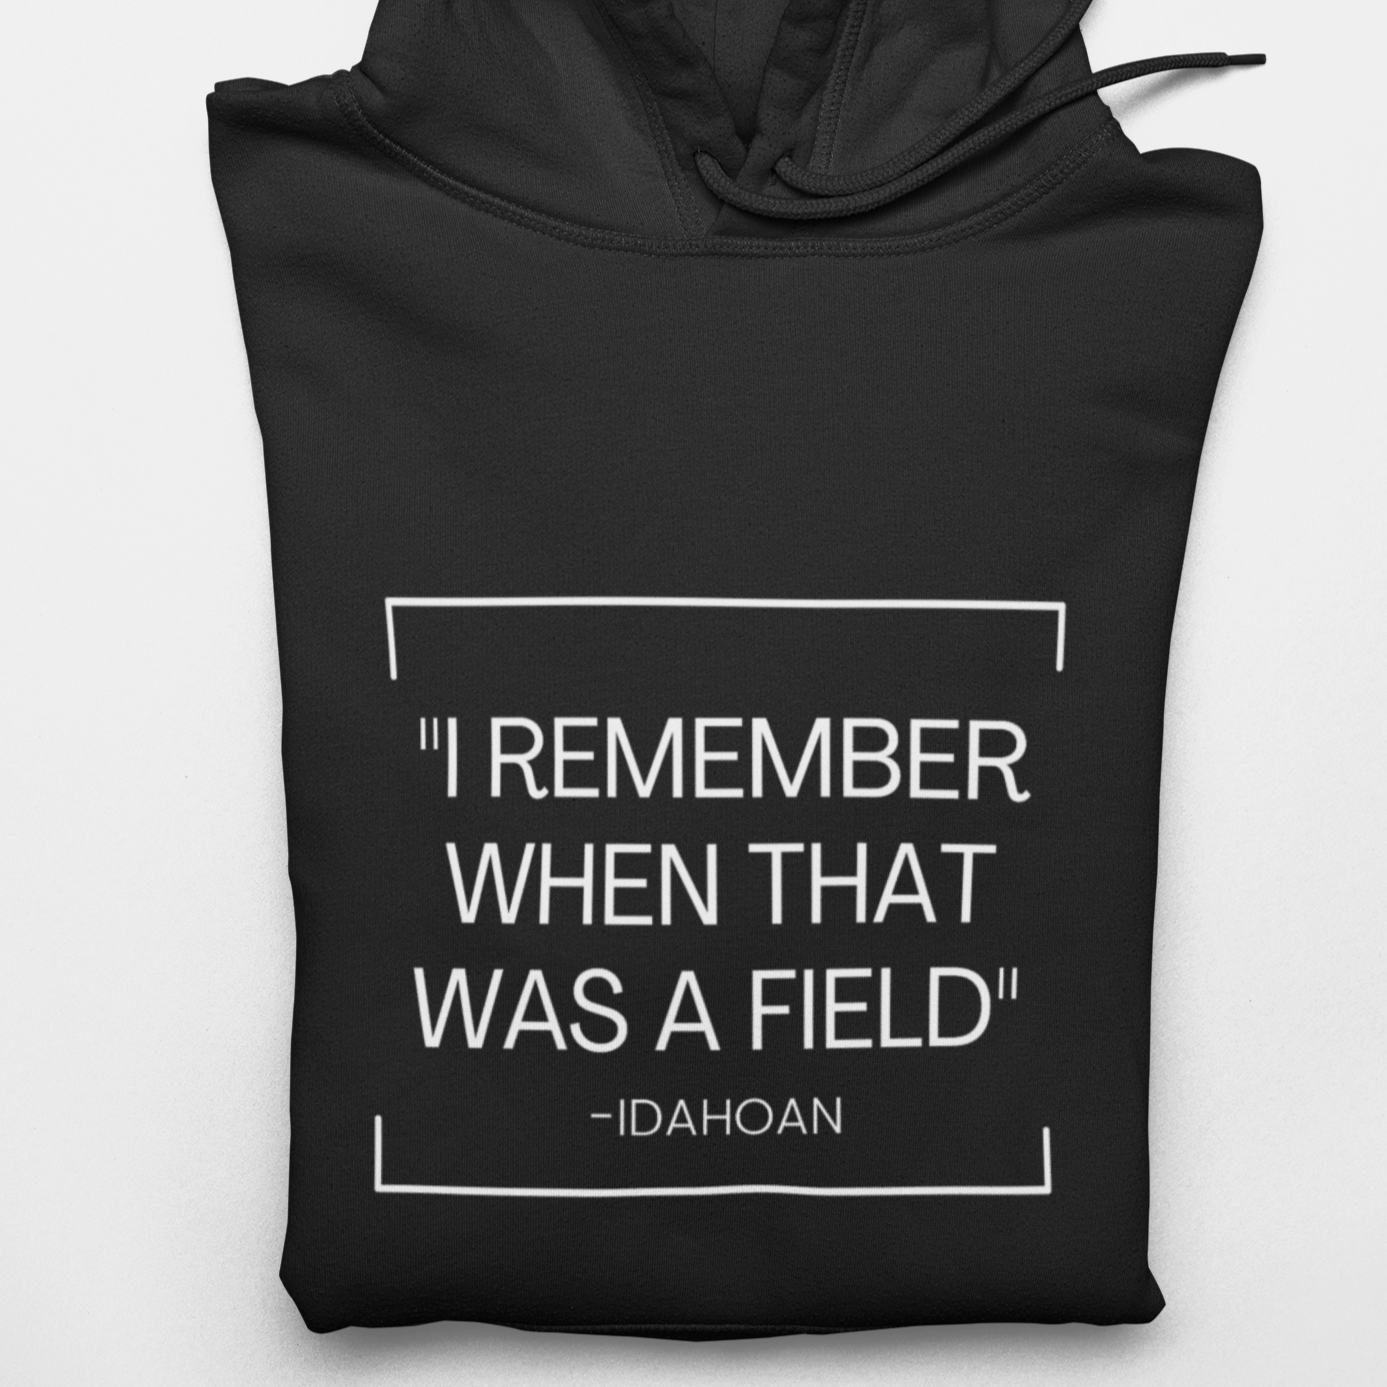 208 Supply Co Hoodies Small / Black I Remember When That Was A Field Unisex Midweight Hoodie